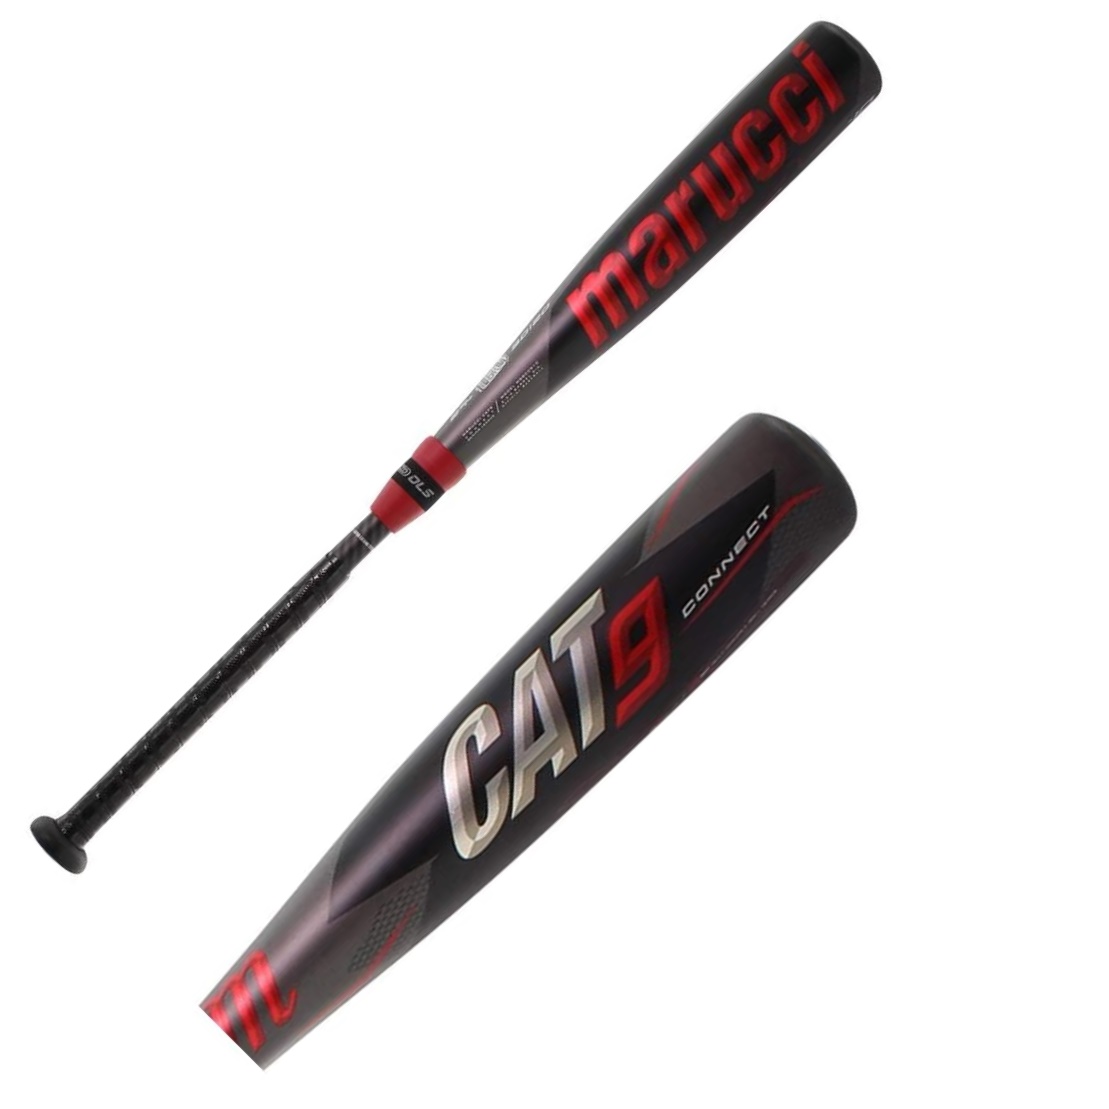 marucci-cat-9-connect-10-usssa-baseball-bat-31-inch-21-oz MSBCC910-3121 Marucci  Utilizing a three-stage thermal treatment process our new AZR alloy offers